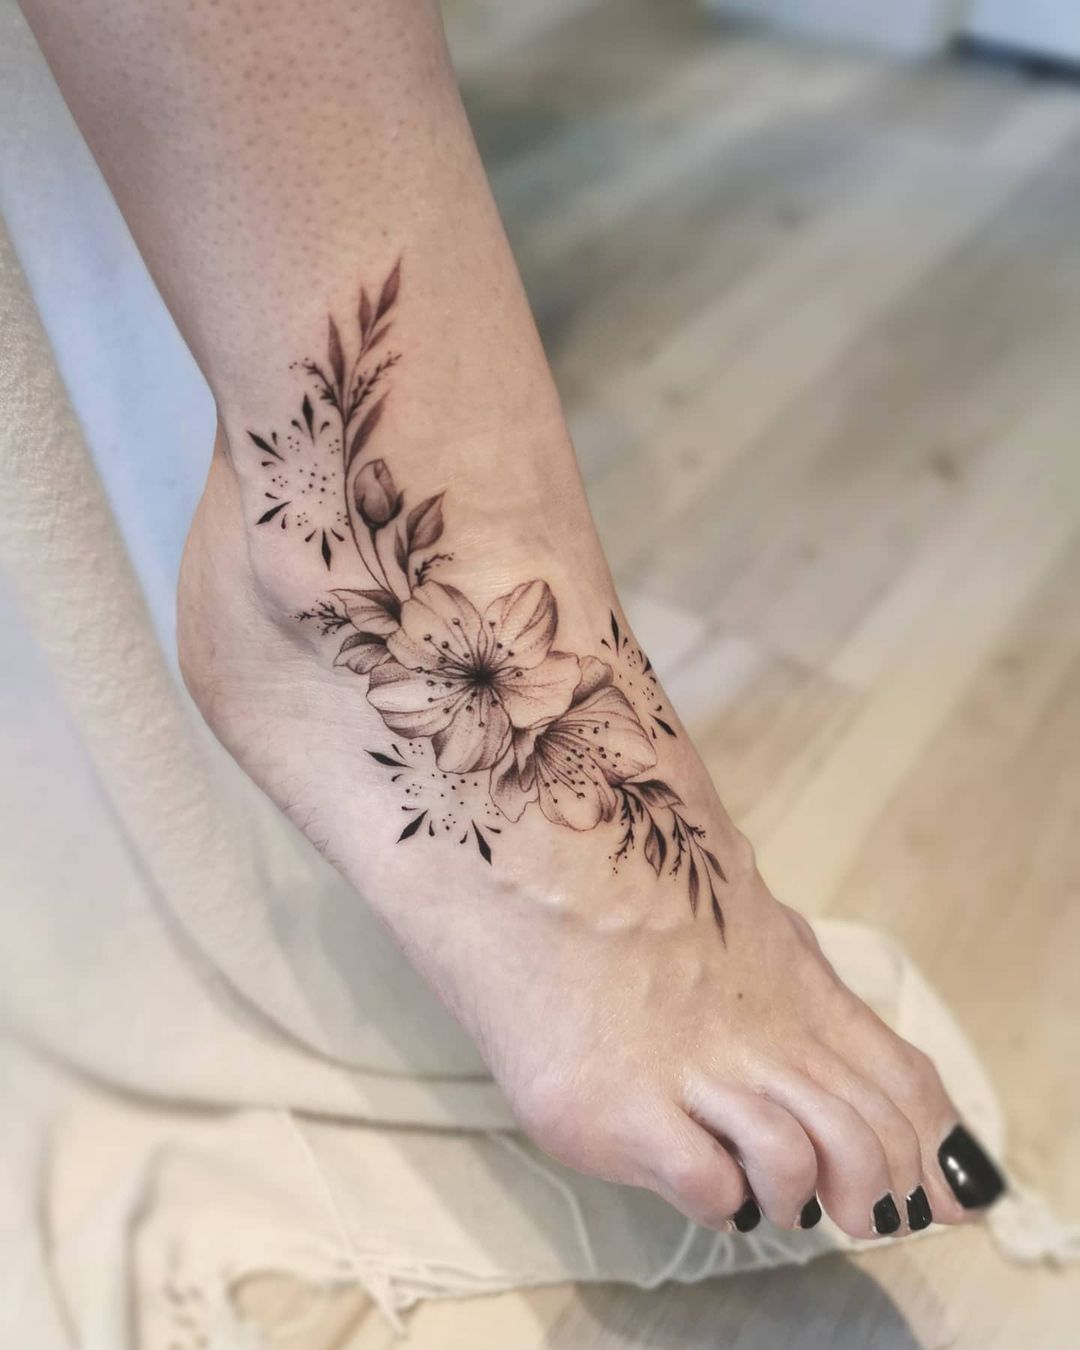 50+ Best Striking Foot Tattoos Designs And Ideas For Women